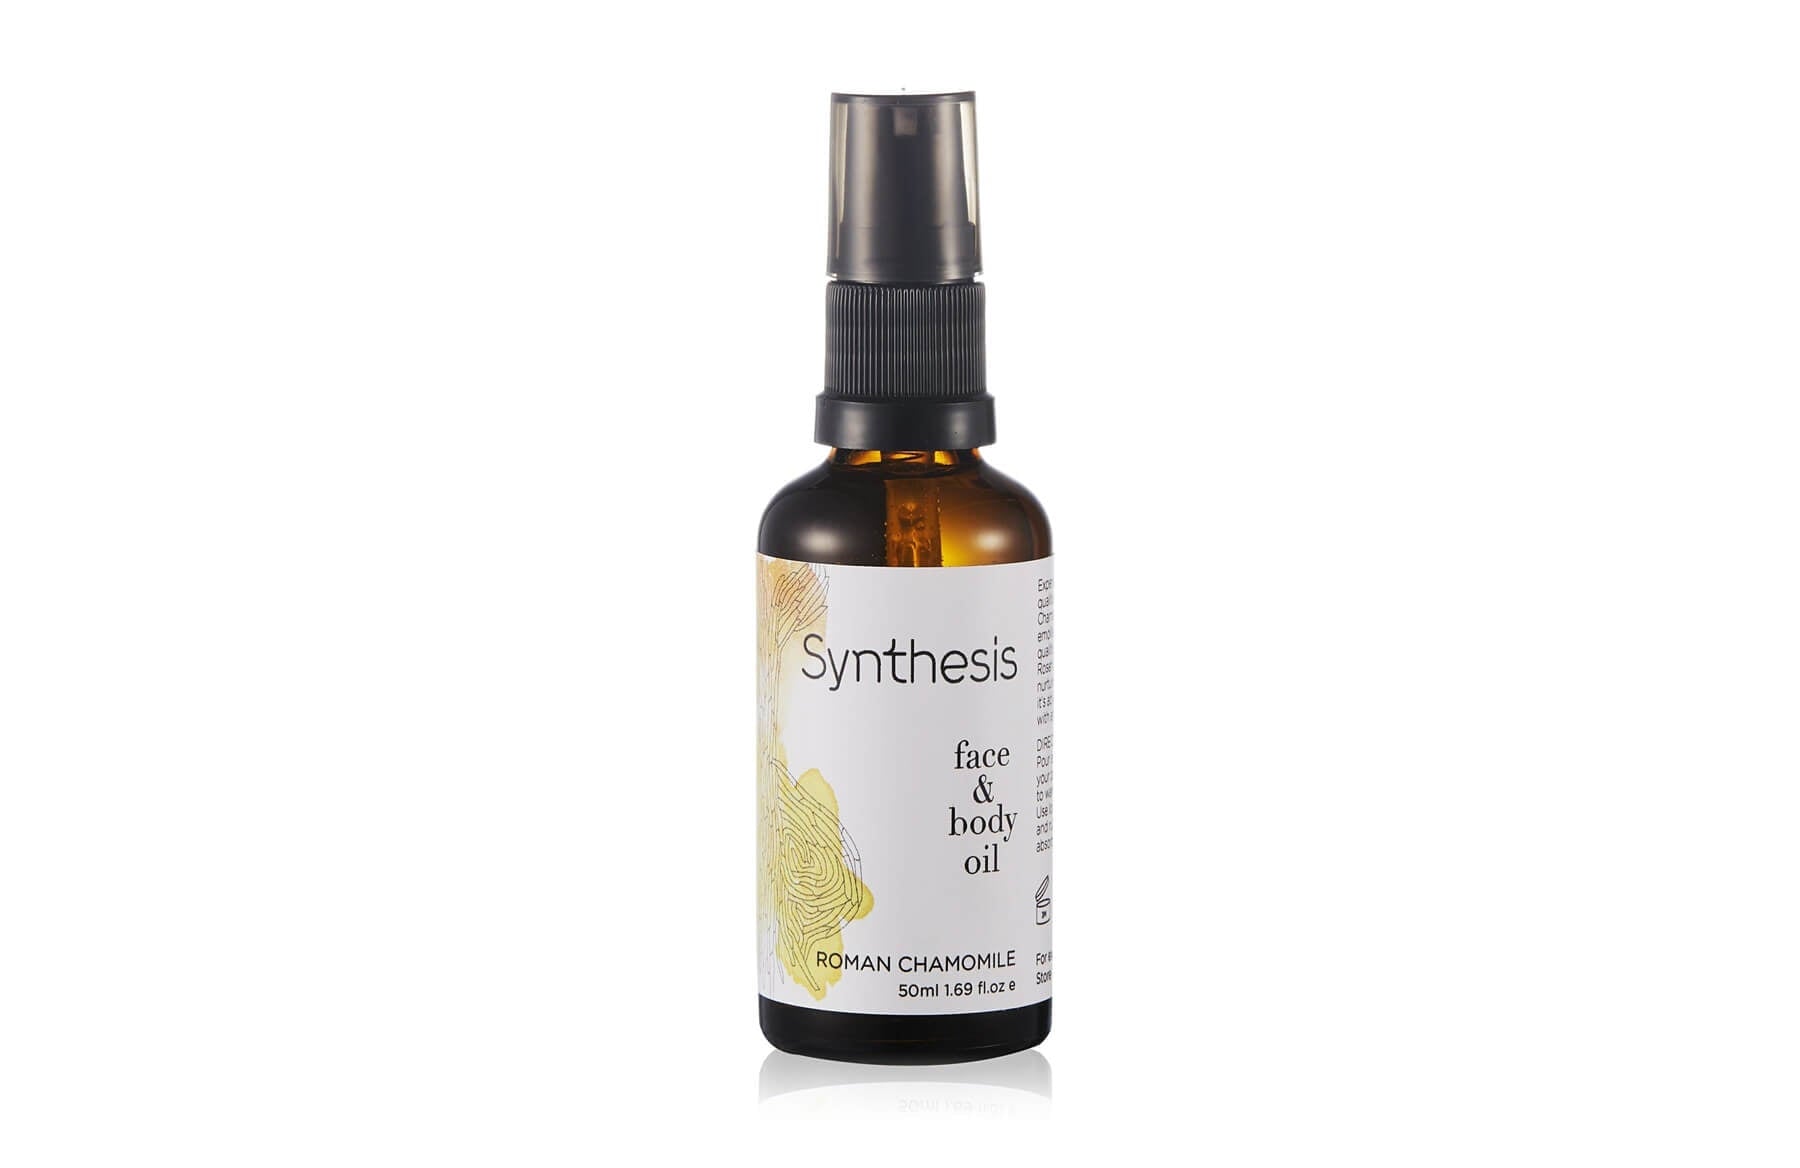 Product Spotlight: Soothe Face & Body Oil